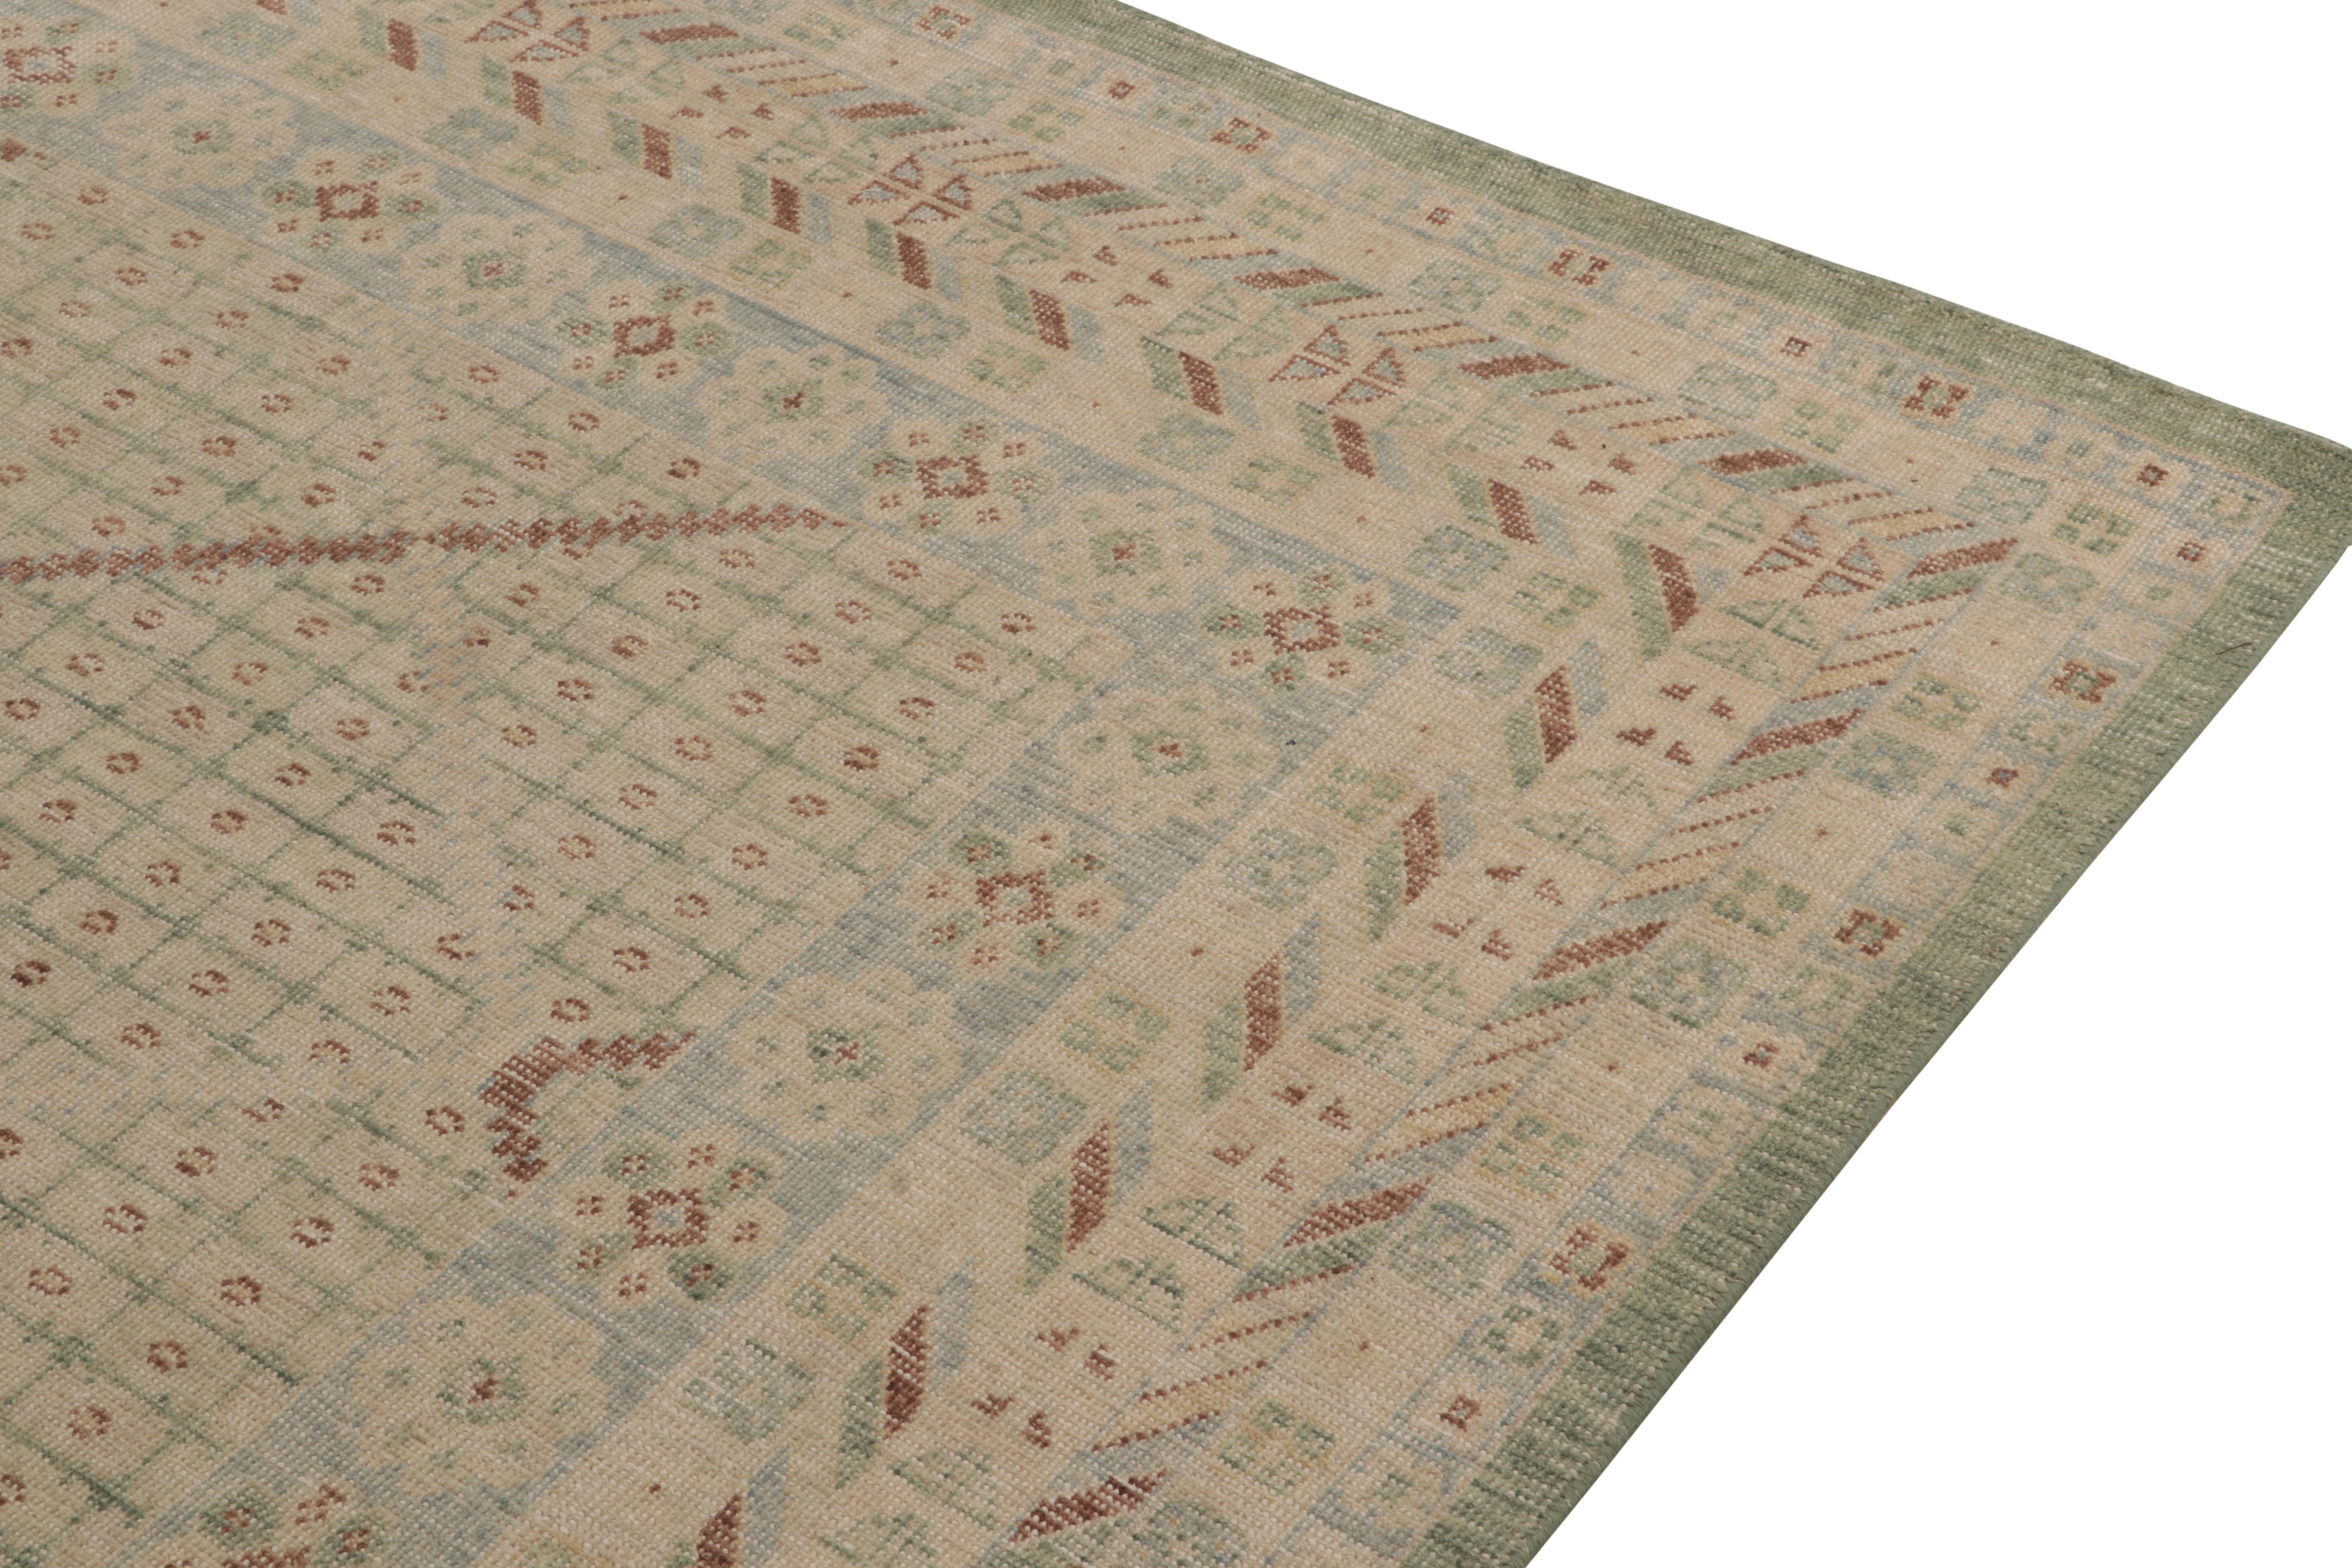 Rug & Kilim’s Distressed Khotan Style Rug in Beige-Brown, Green and Blue Pattern In New Condition For Sale In Long Island City, NY